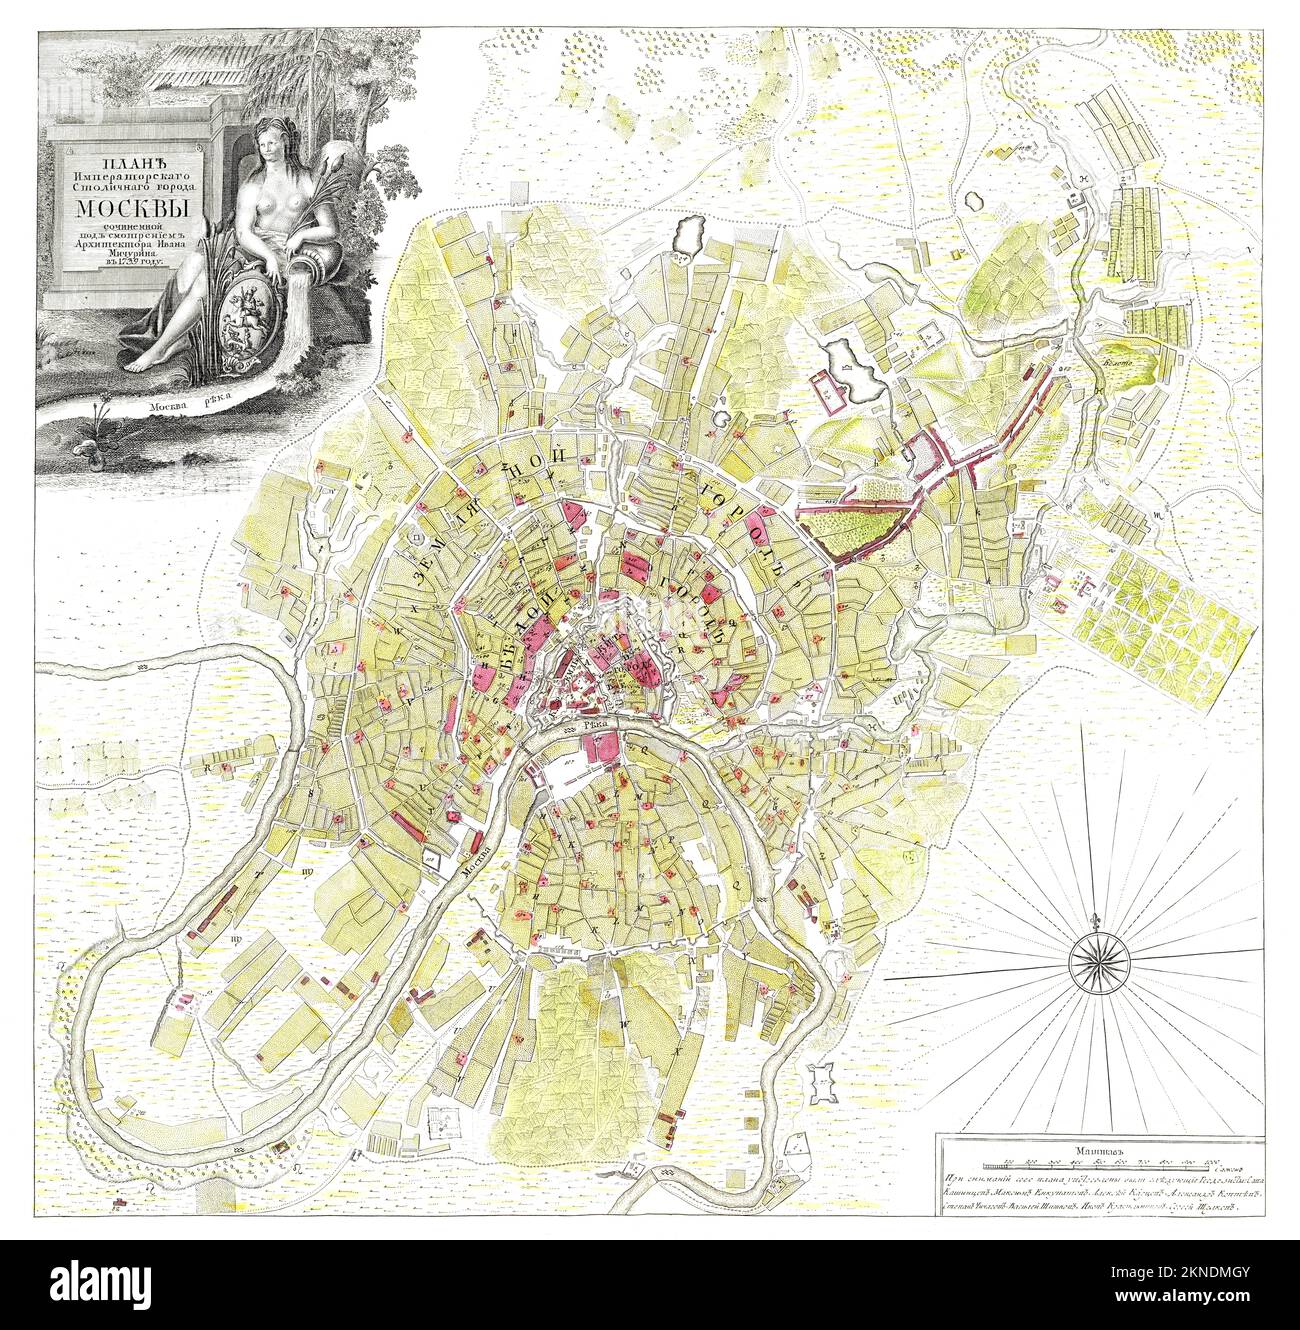 Vintage city plan of Moscow and area around it from 19th century. Maps are beautifully hand illustrated and engraved showing it at the time. Stock Photo